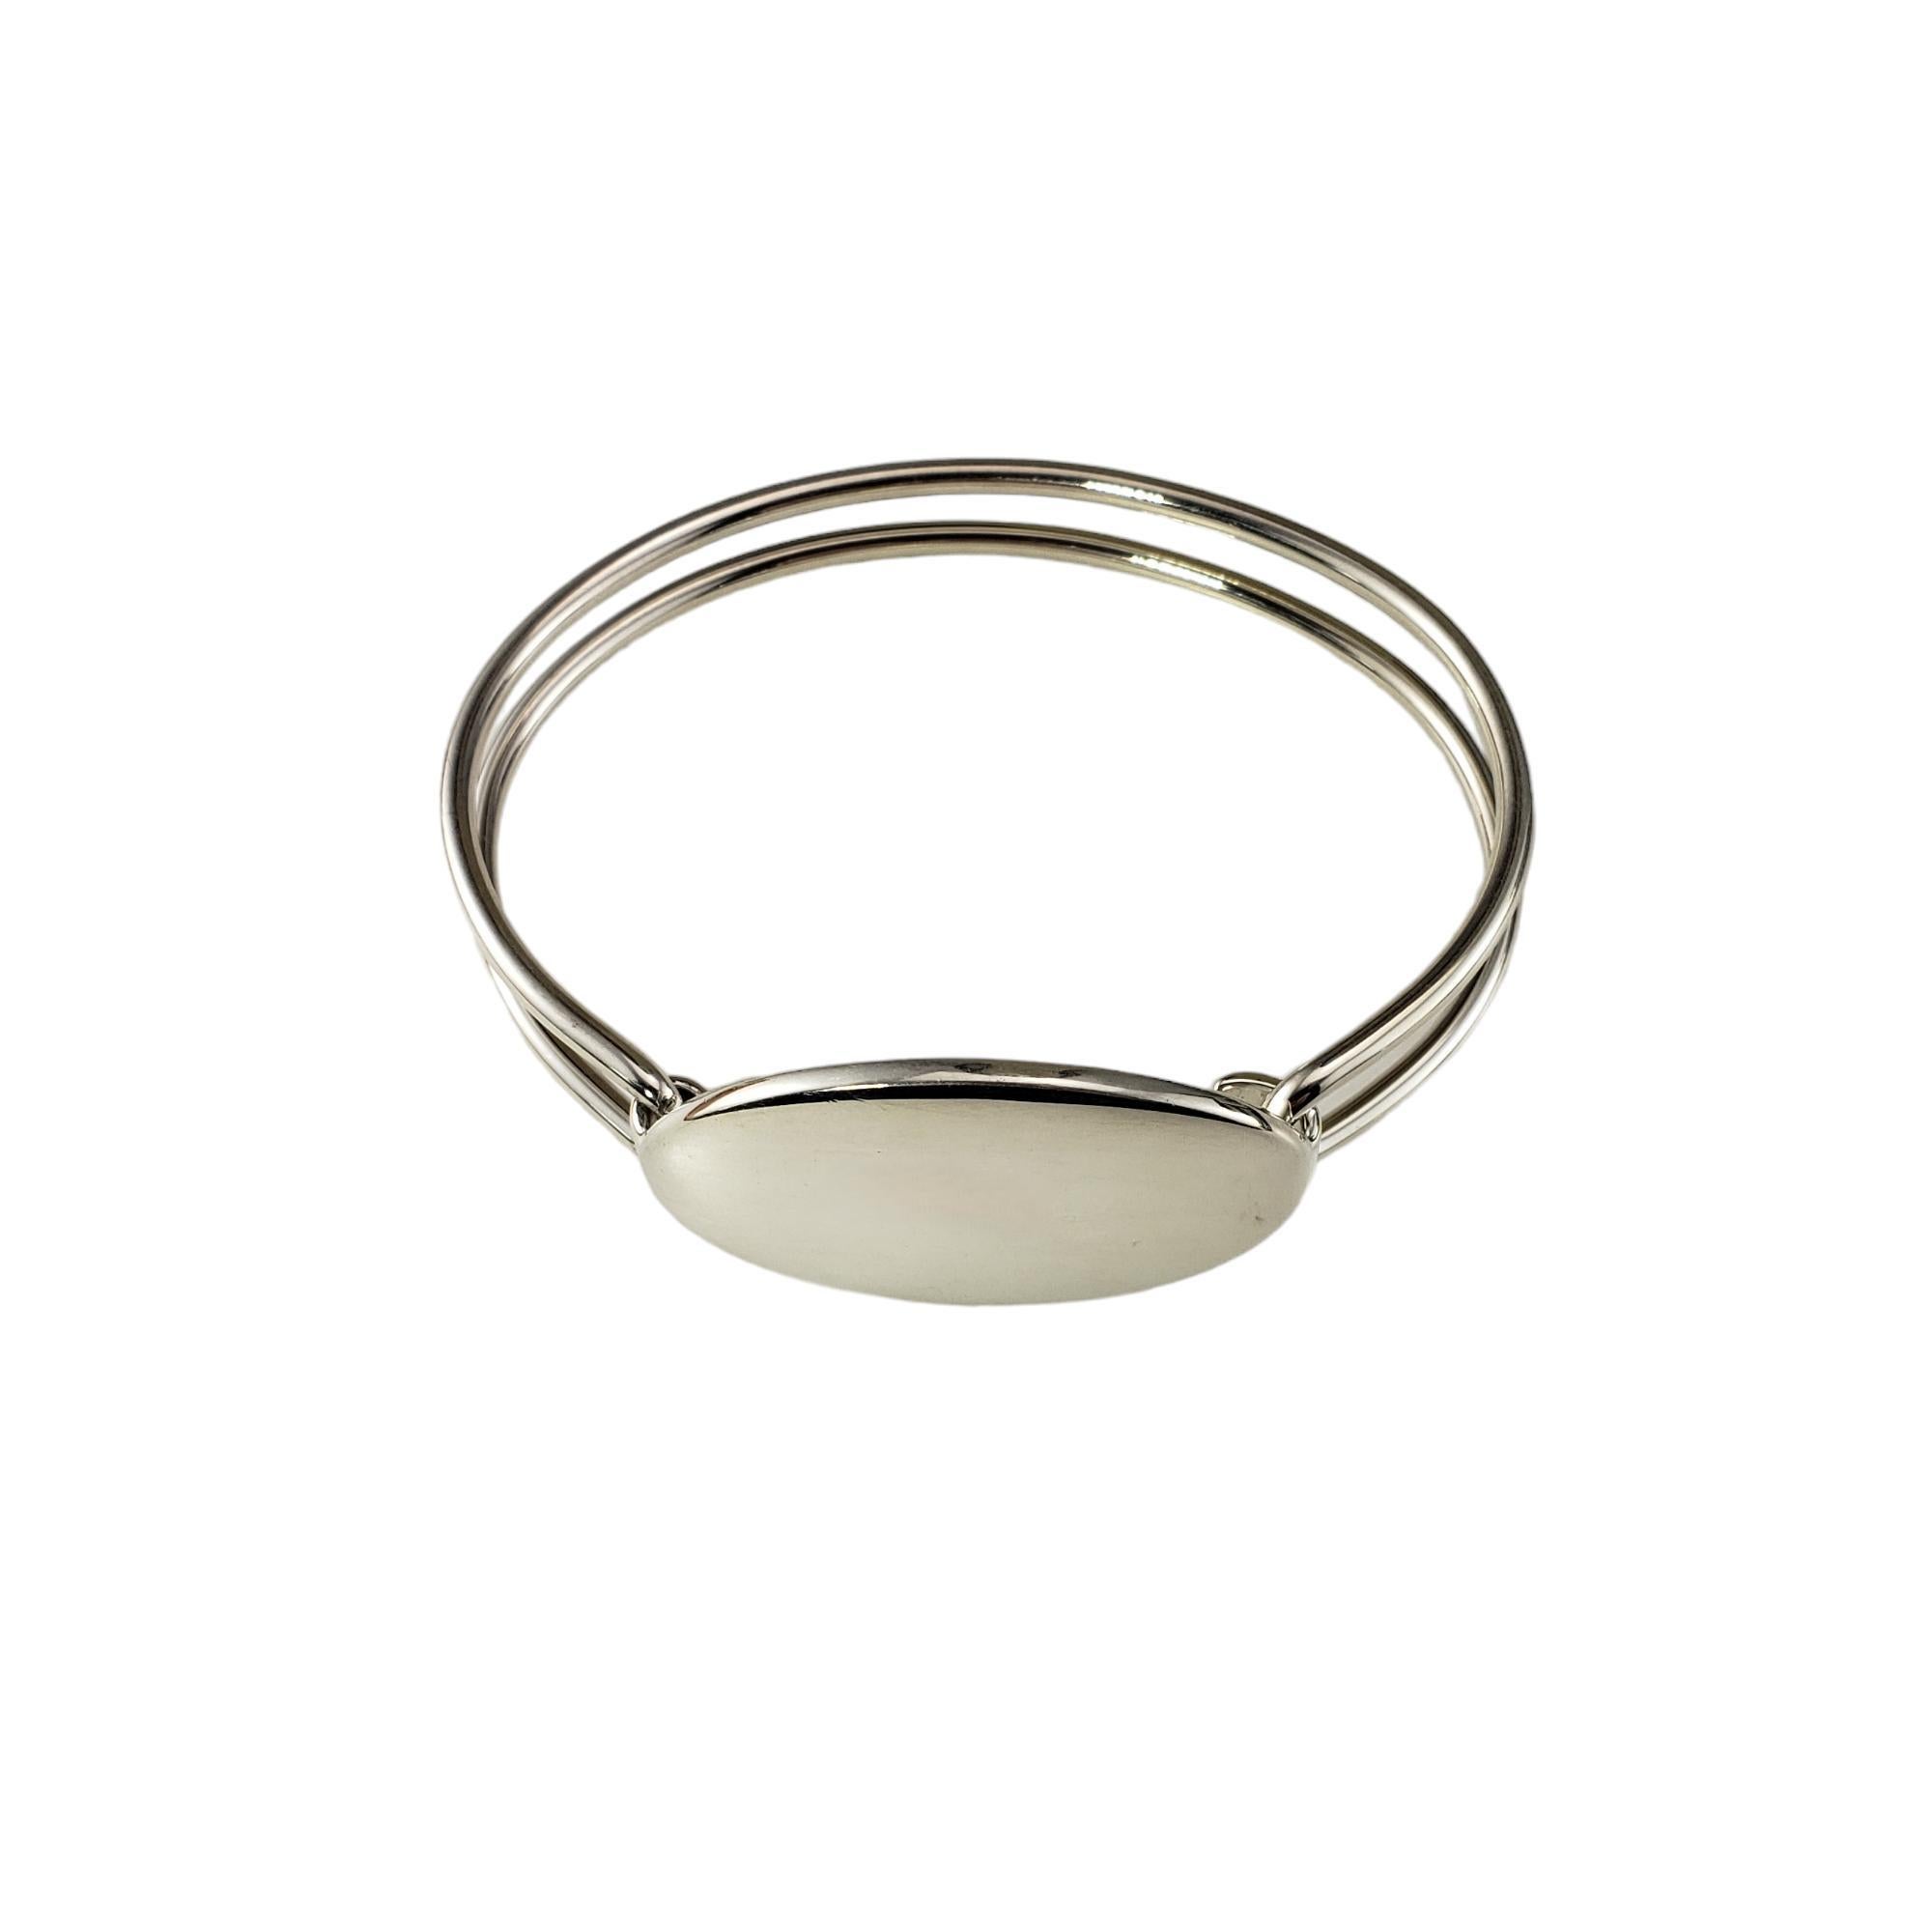 Tiffany & Co. Sterling Silver Oval ID Double Wire Bracelet-

This elegant ID bangle bracelet is crafted in classic sterling silver by Tiffany & Co. ID tag 

Width: 1 inch. Bracelet width: 10 mm.

Matching necklace: #17357

Size: 6.5